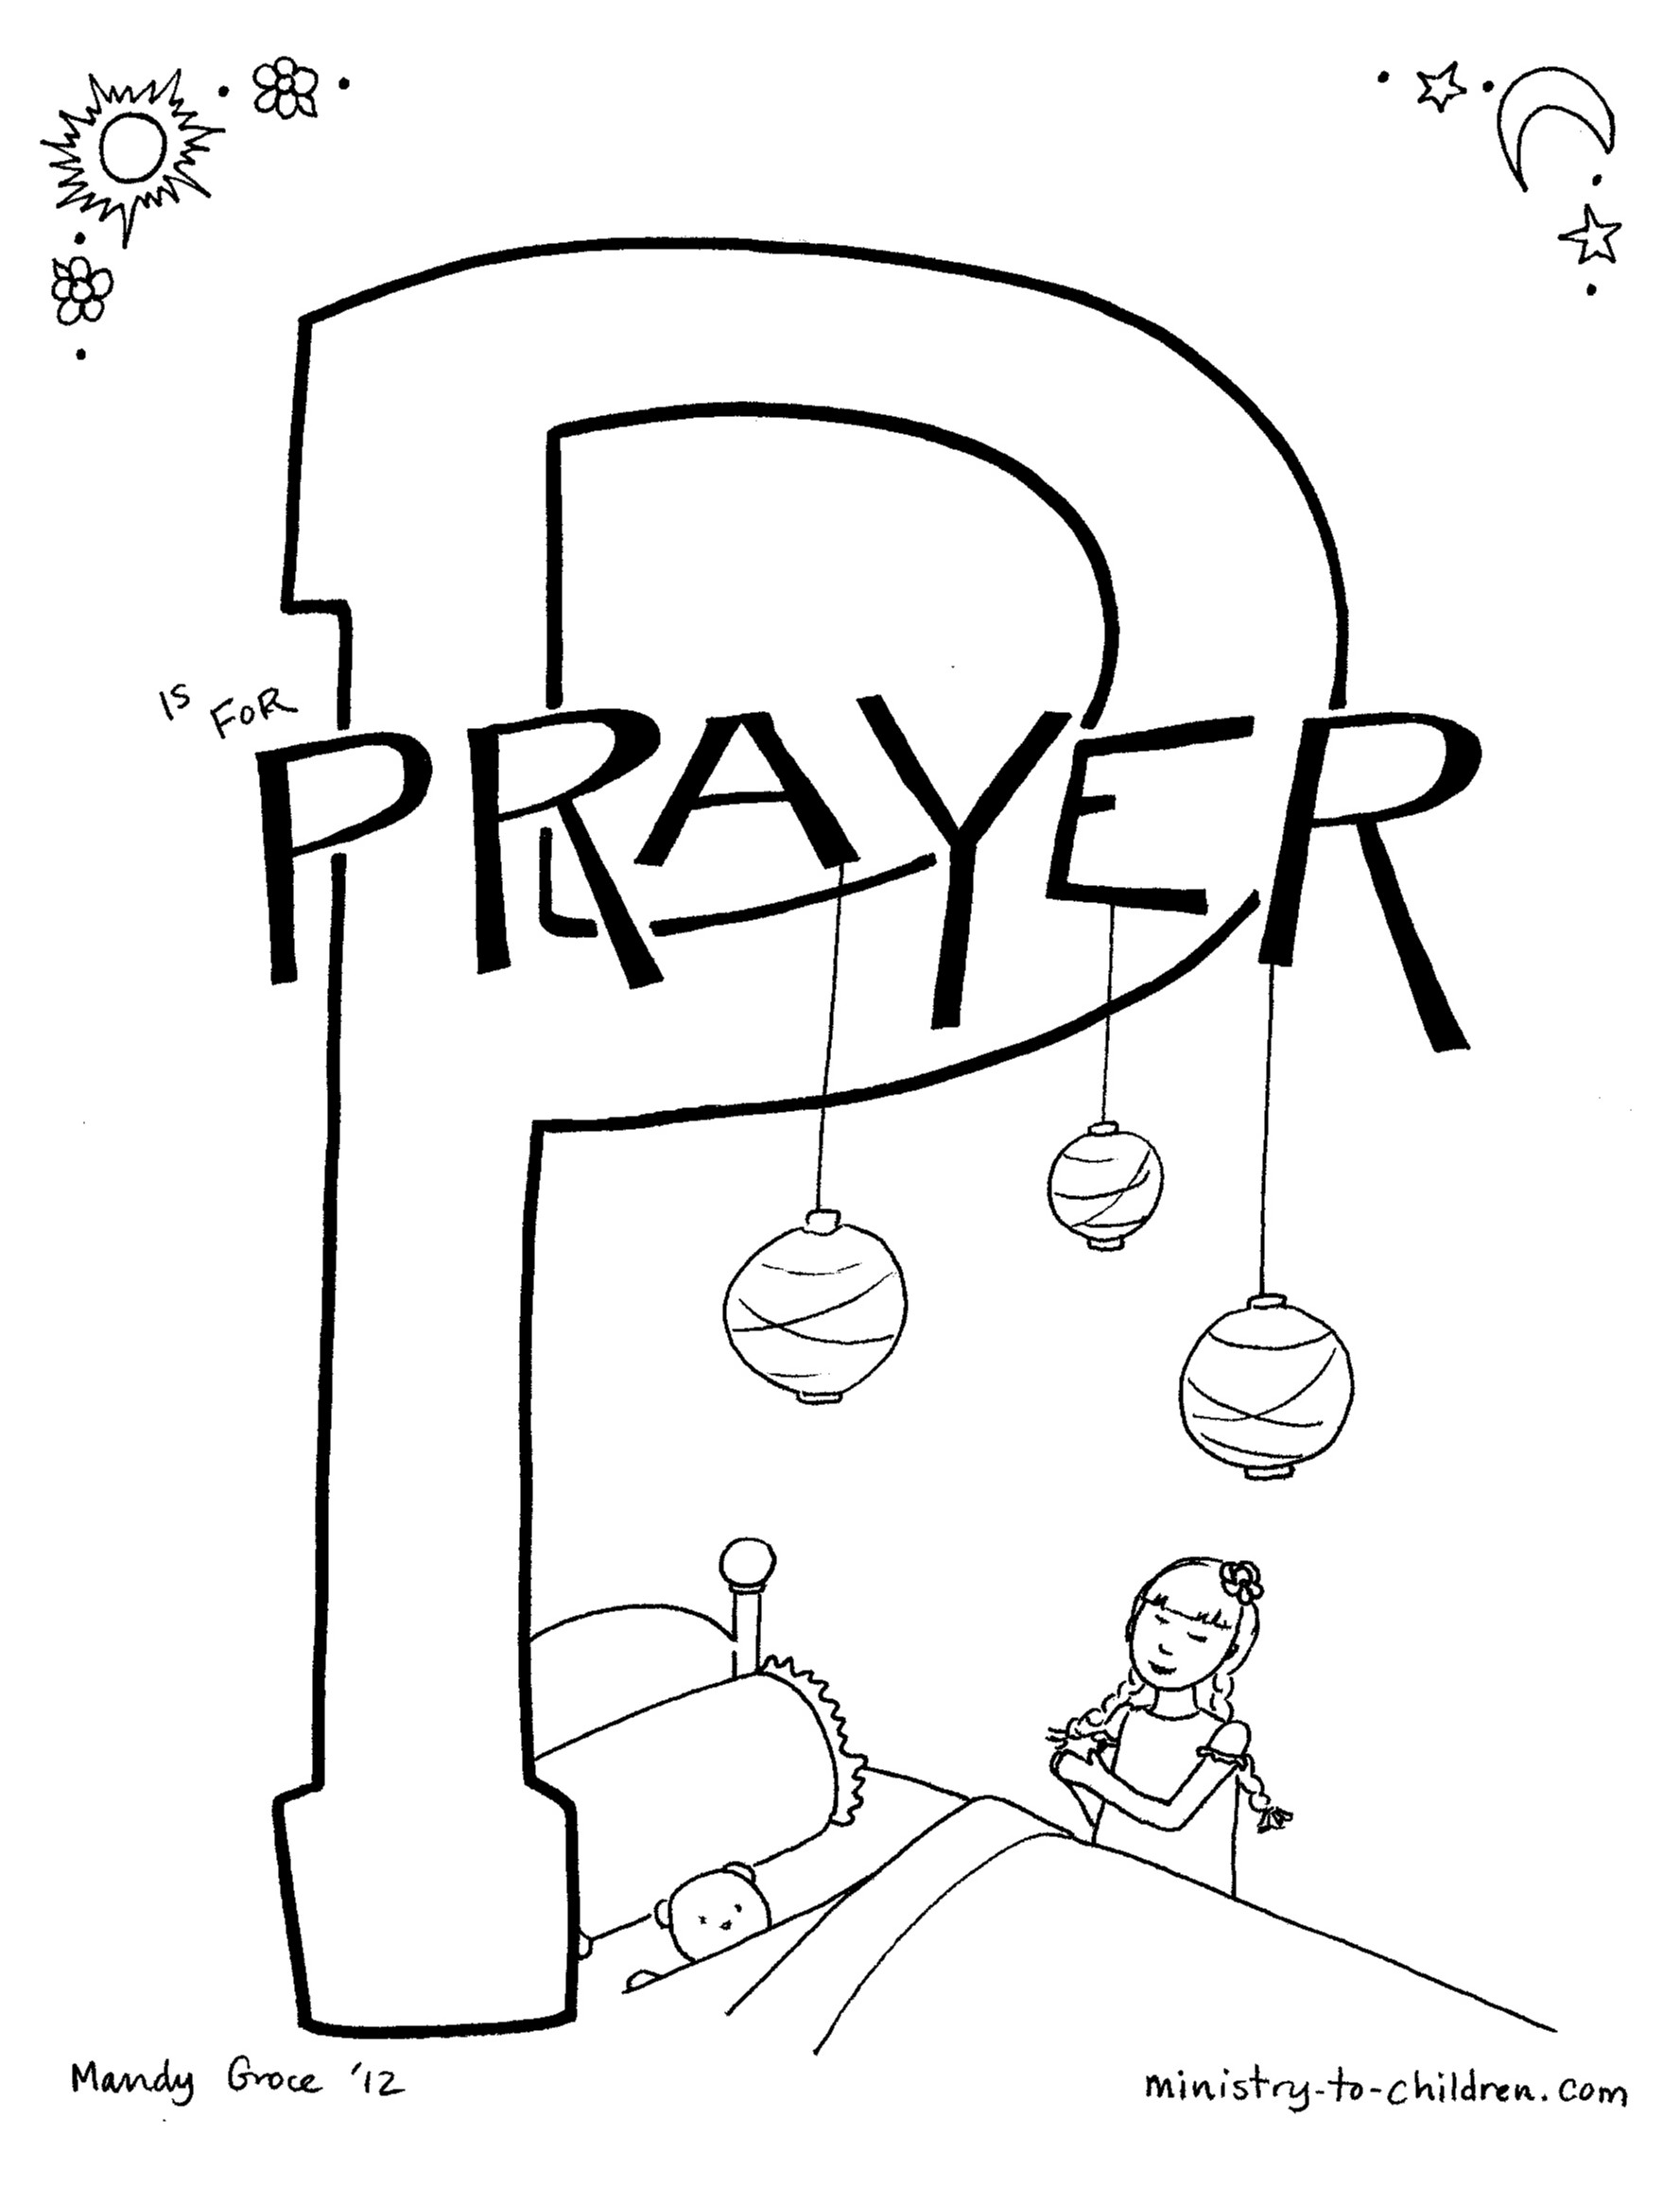 The Lord'S Prayer Coloring Pages Printable
 Hannah Bible Story Coloring Page Coloring Home